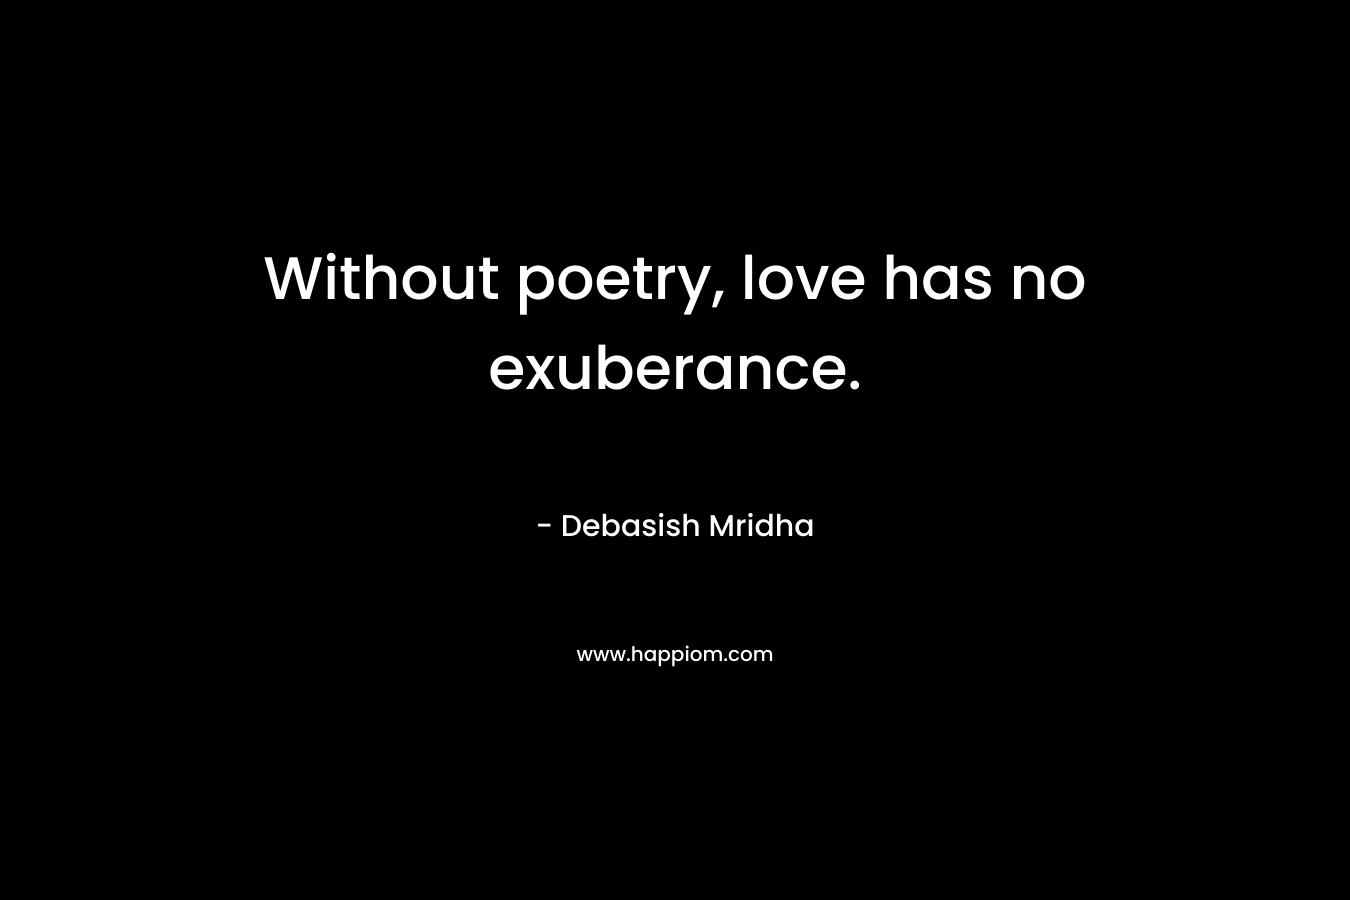 Without poetry, love has no exuberance.